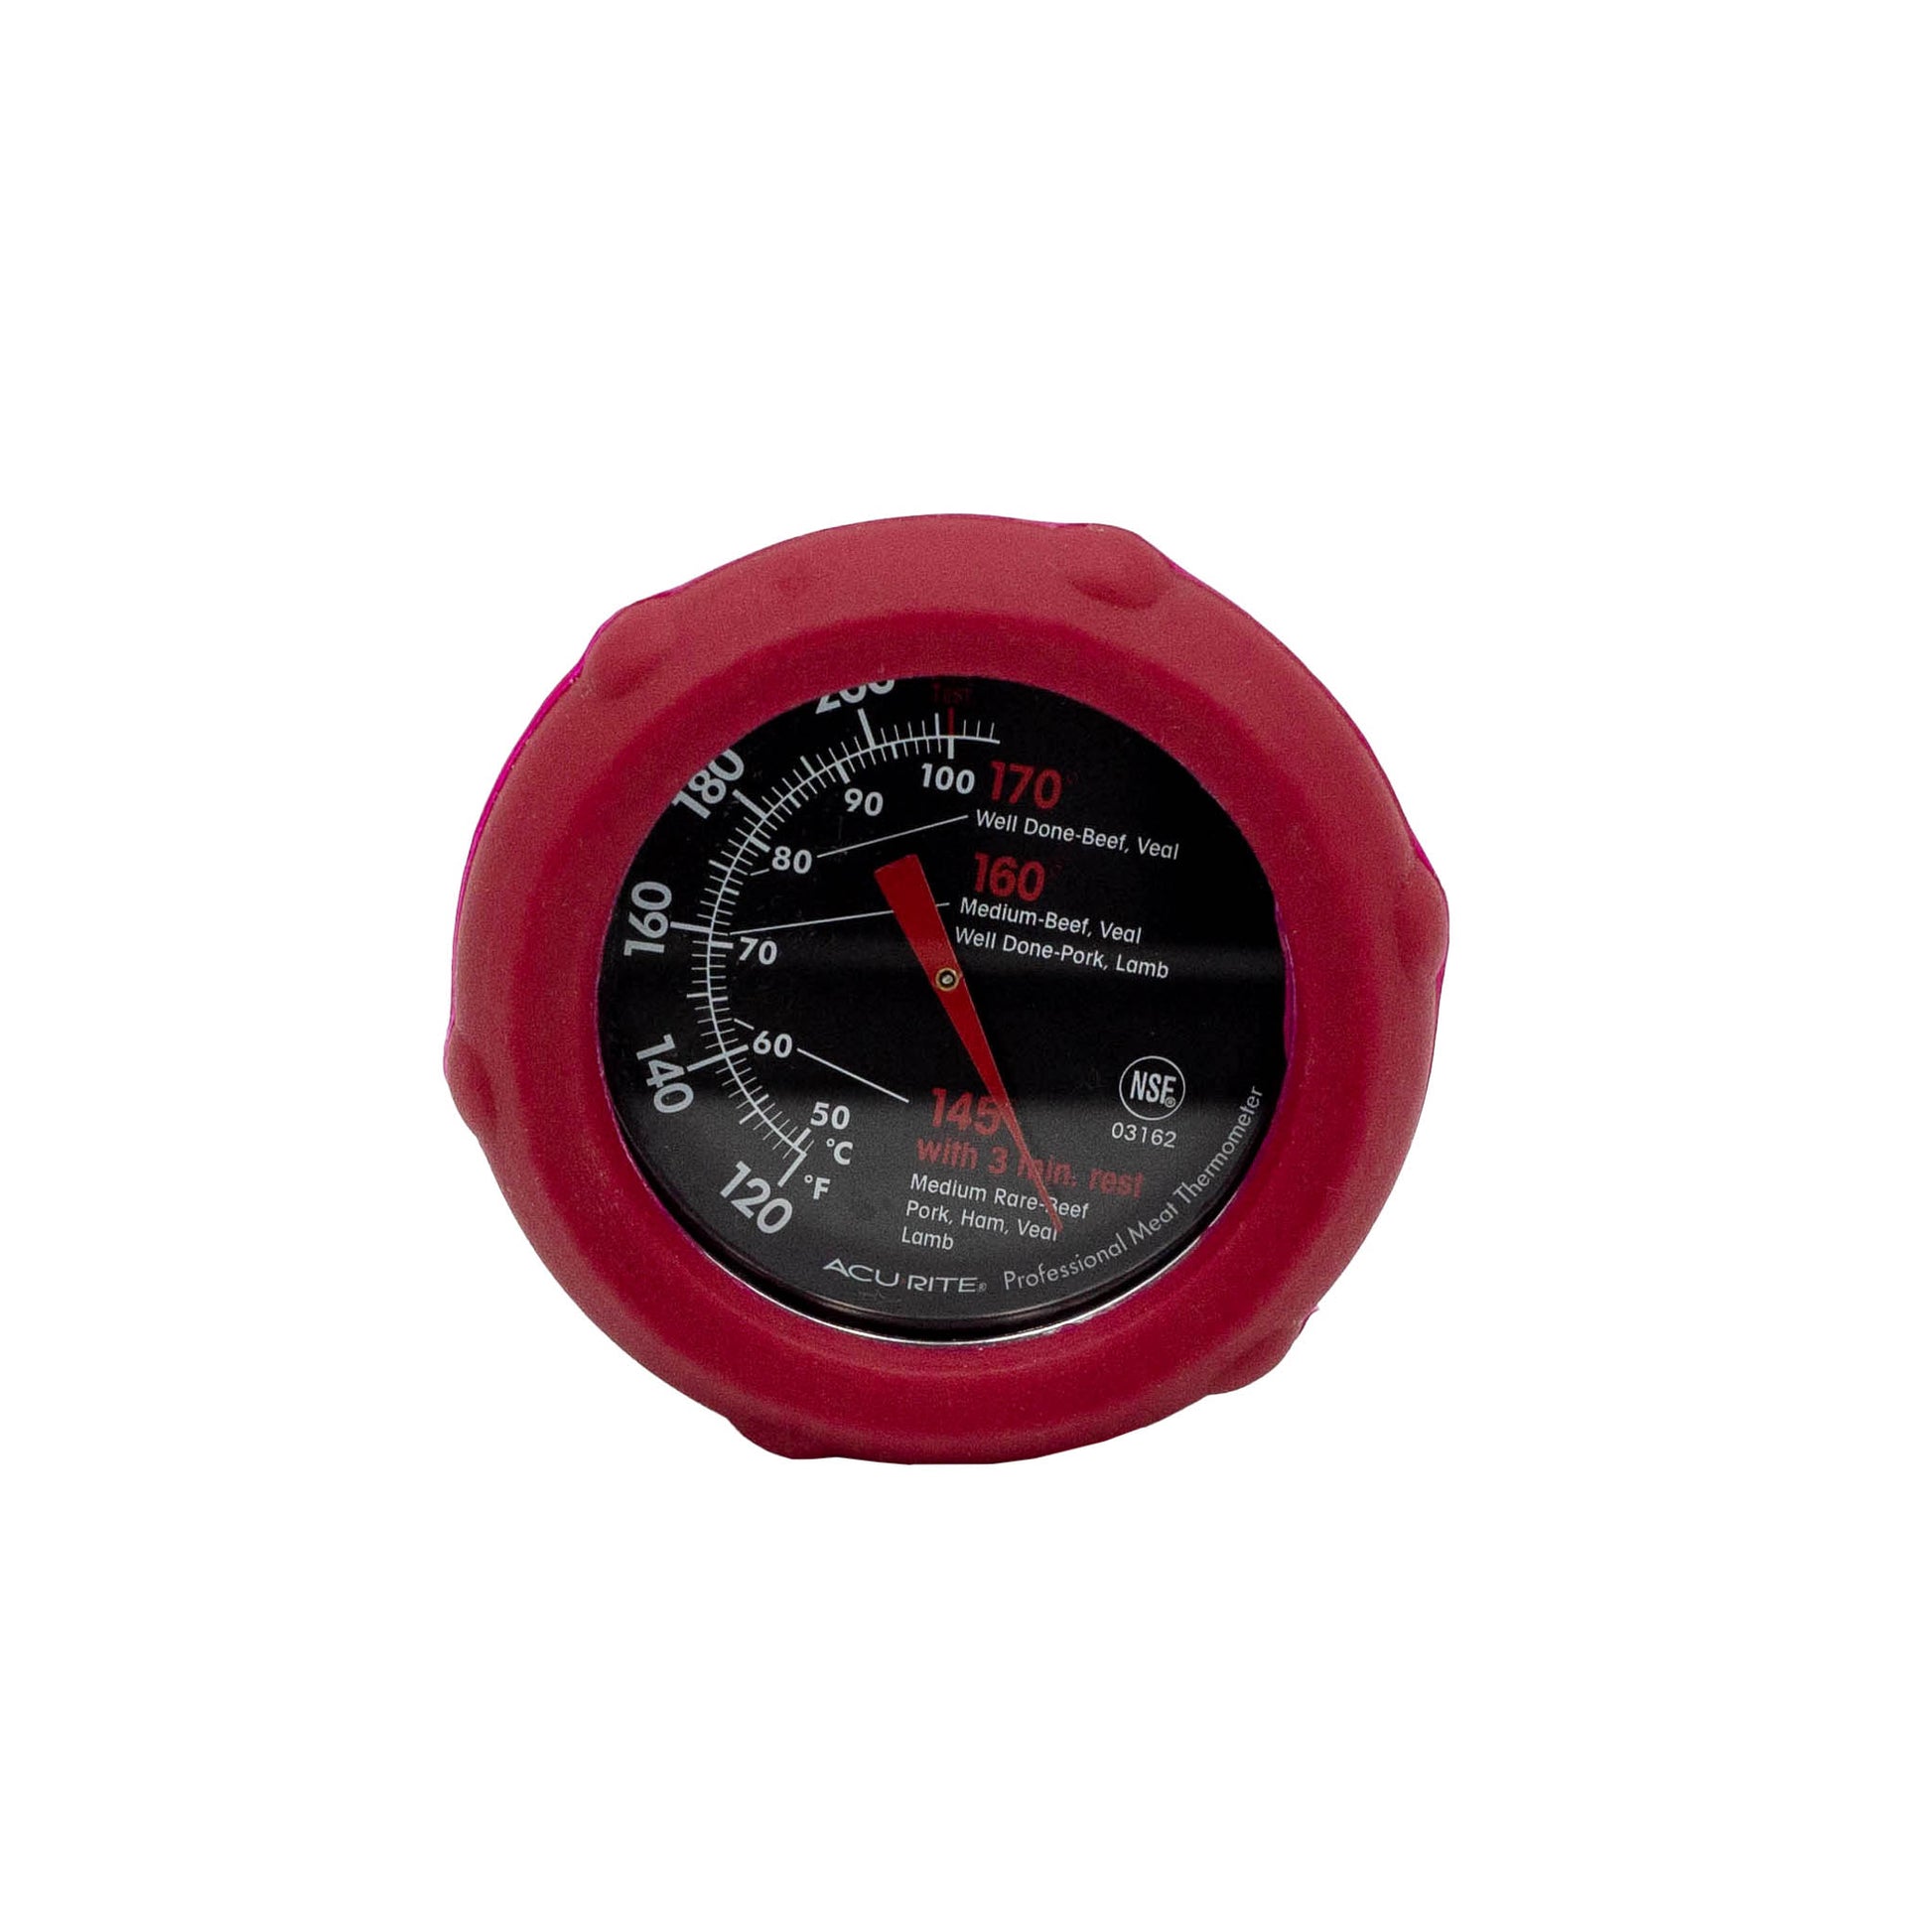 meat thermometer with readings in celsius and fahrenheit. Has markers for rare, medium and well done temperatures.  